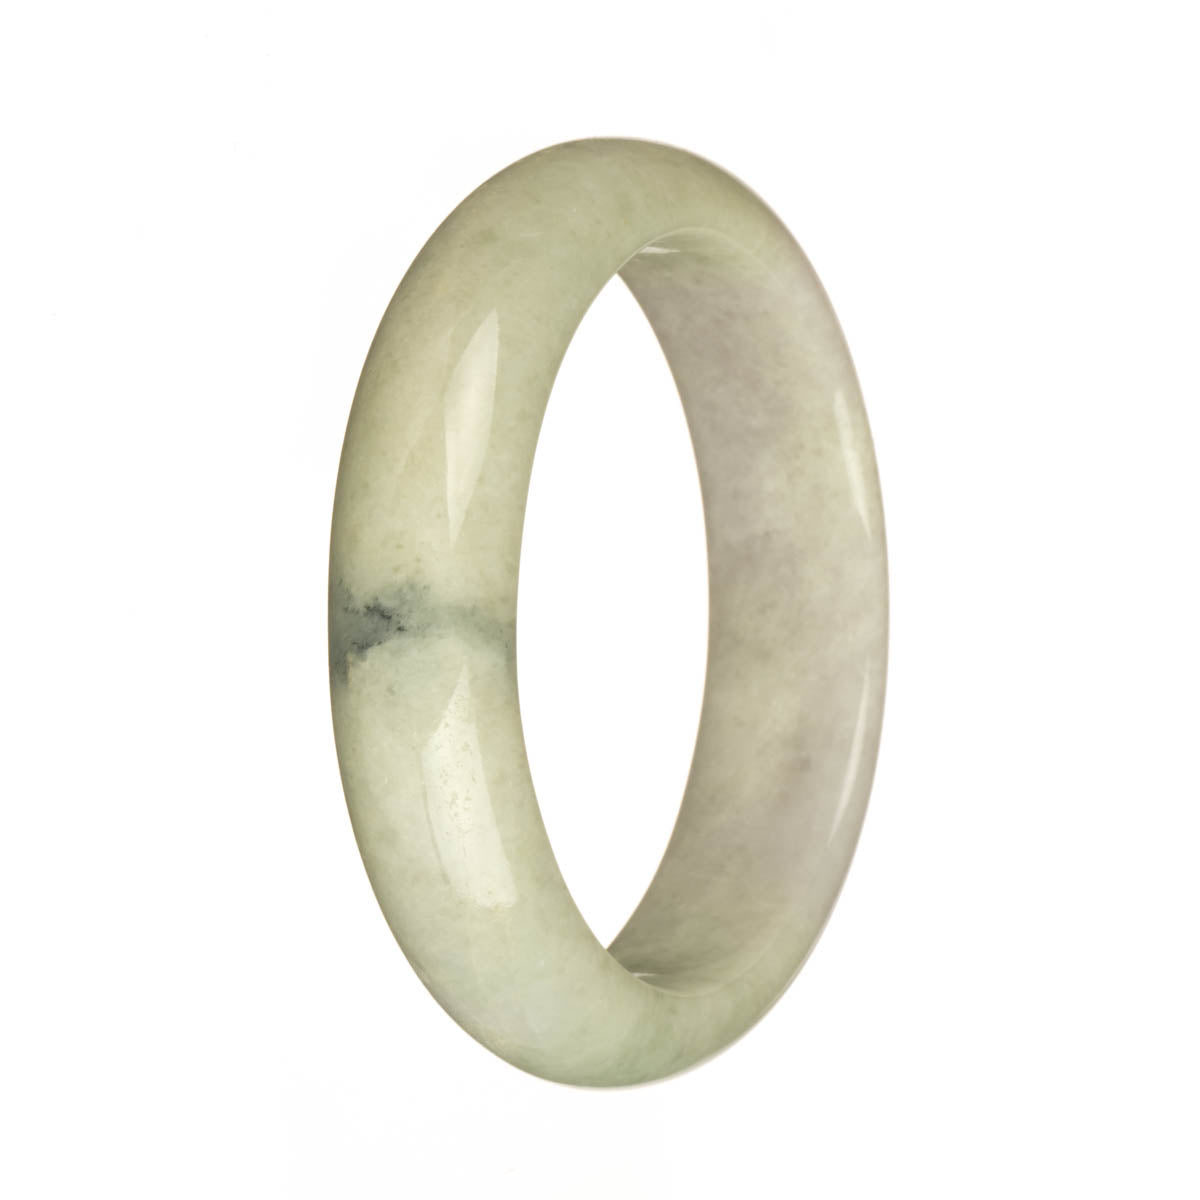 A half moon-shaped traditional jade bangle in pale green and pale lavender with a deep green patch.